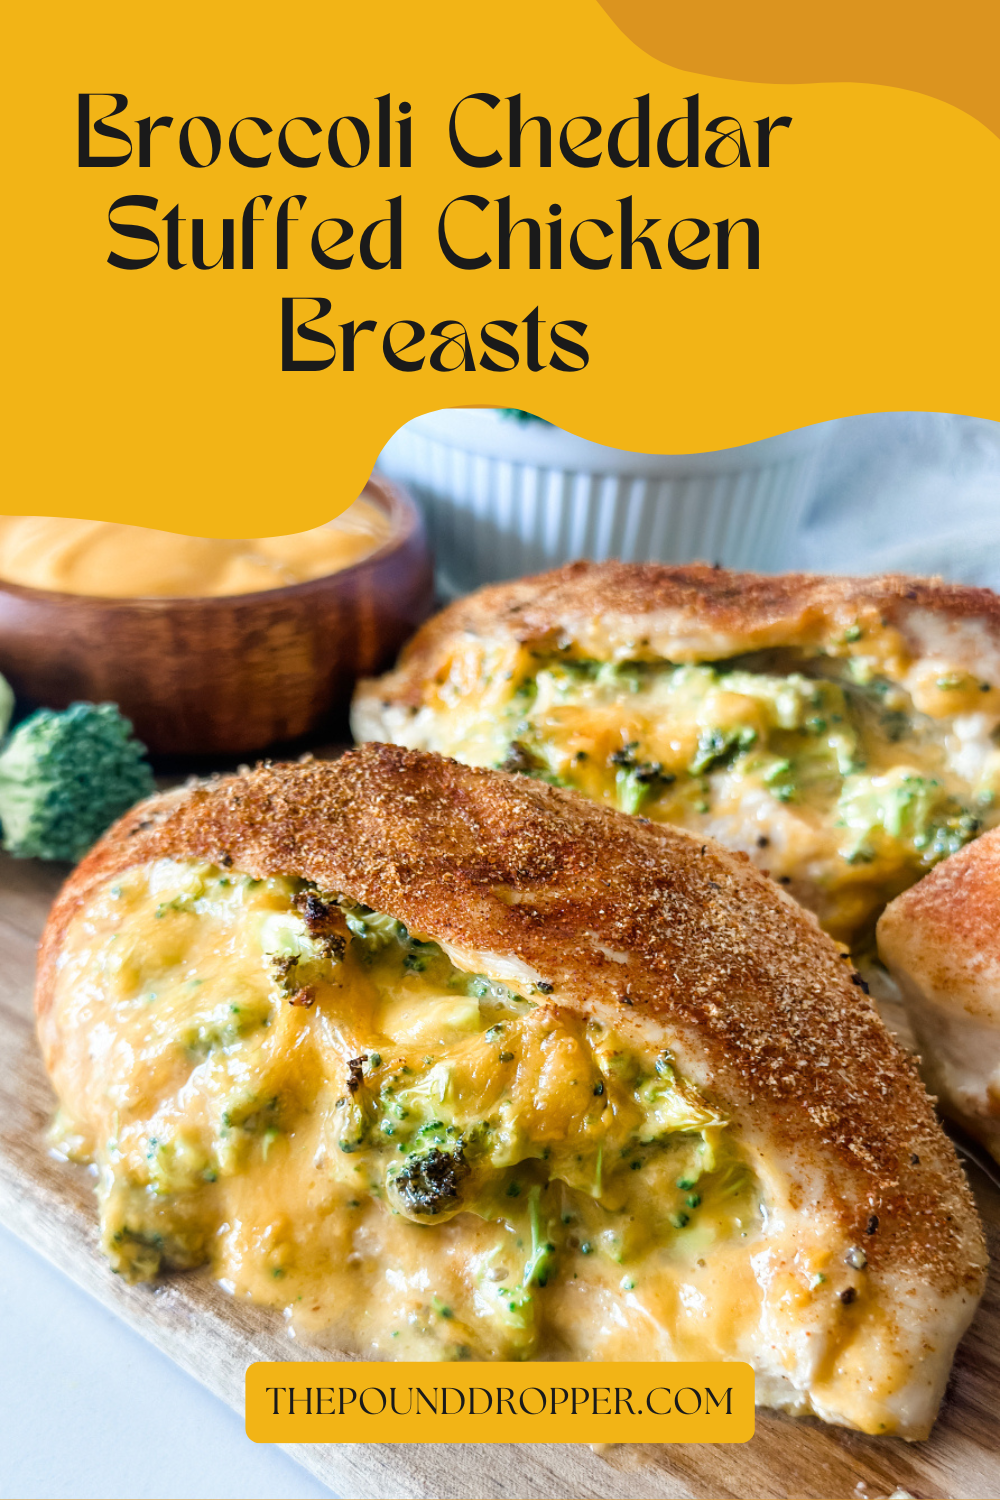 These Broccoli Cheddar Stuffed Chicken Breasts make for a low carb, high protein dinner! They are incredibly tasty, cheesy, and filling! Serve with rice, mashed potatoes, cauliflower rice, or your favorite steamed veggies for a an easy complete meal! via @pounddropper